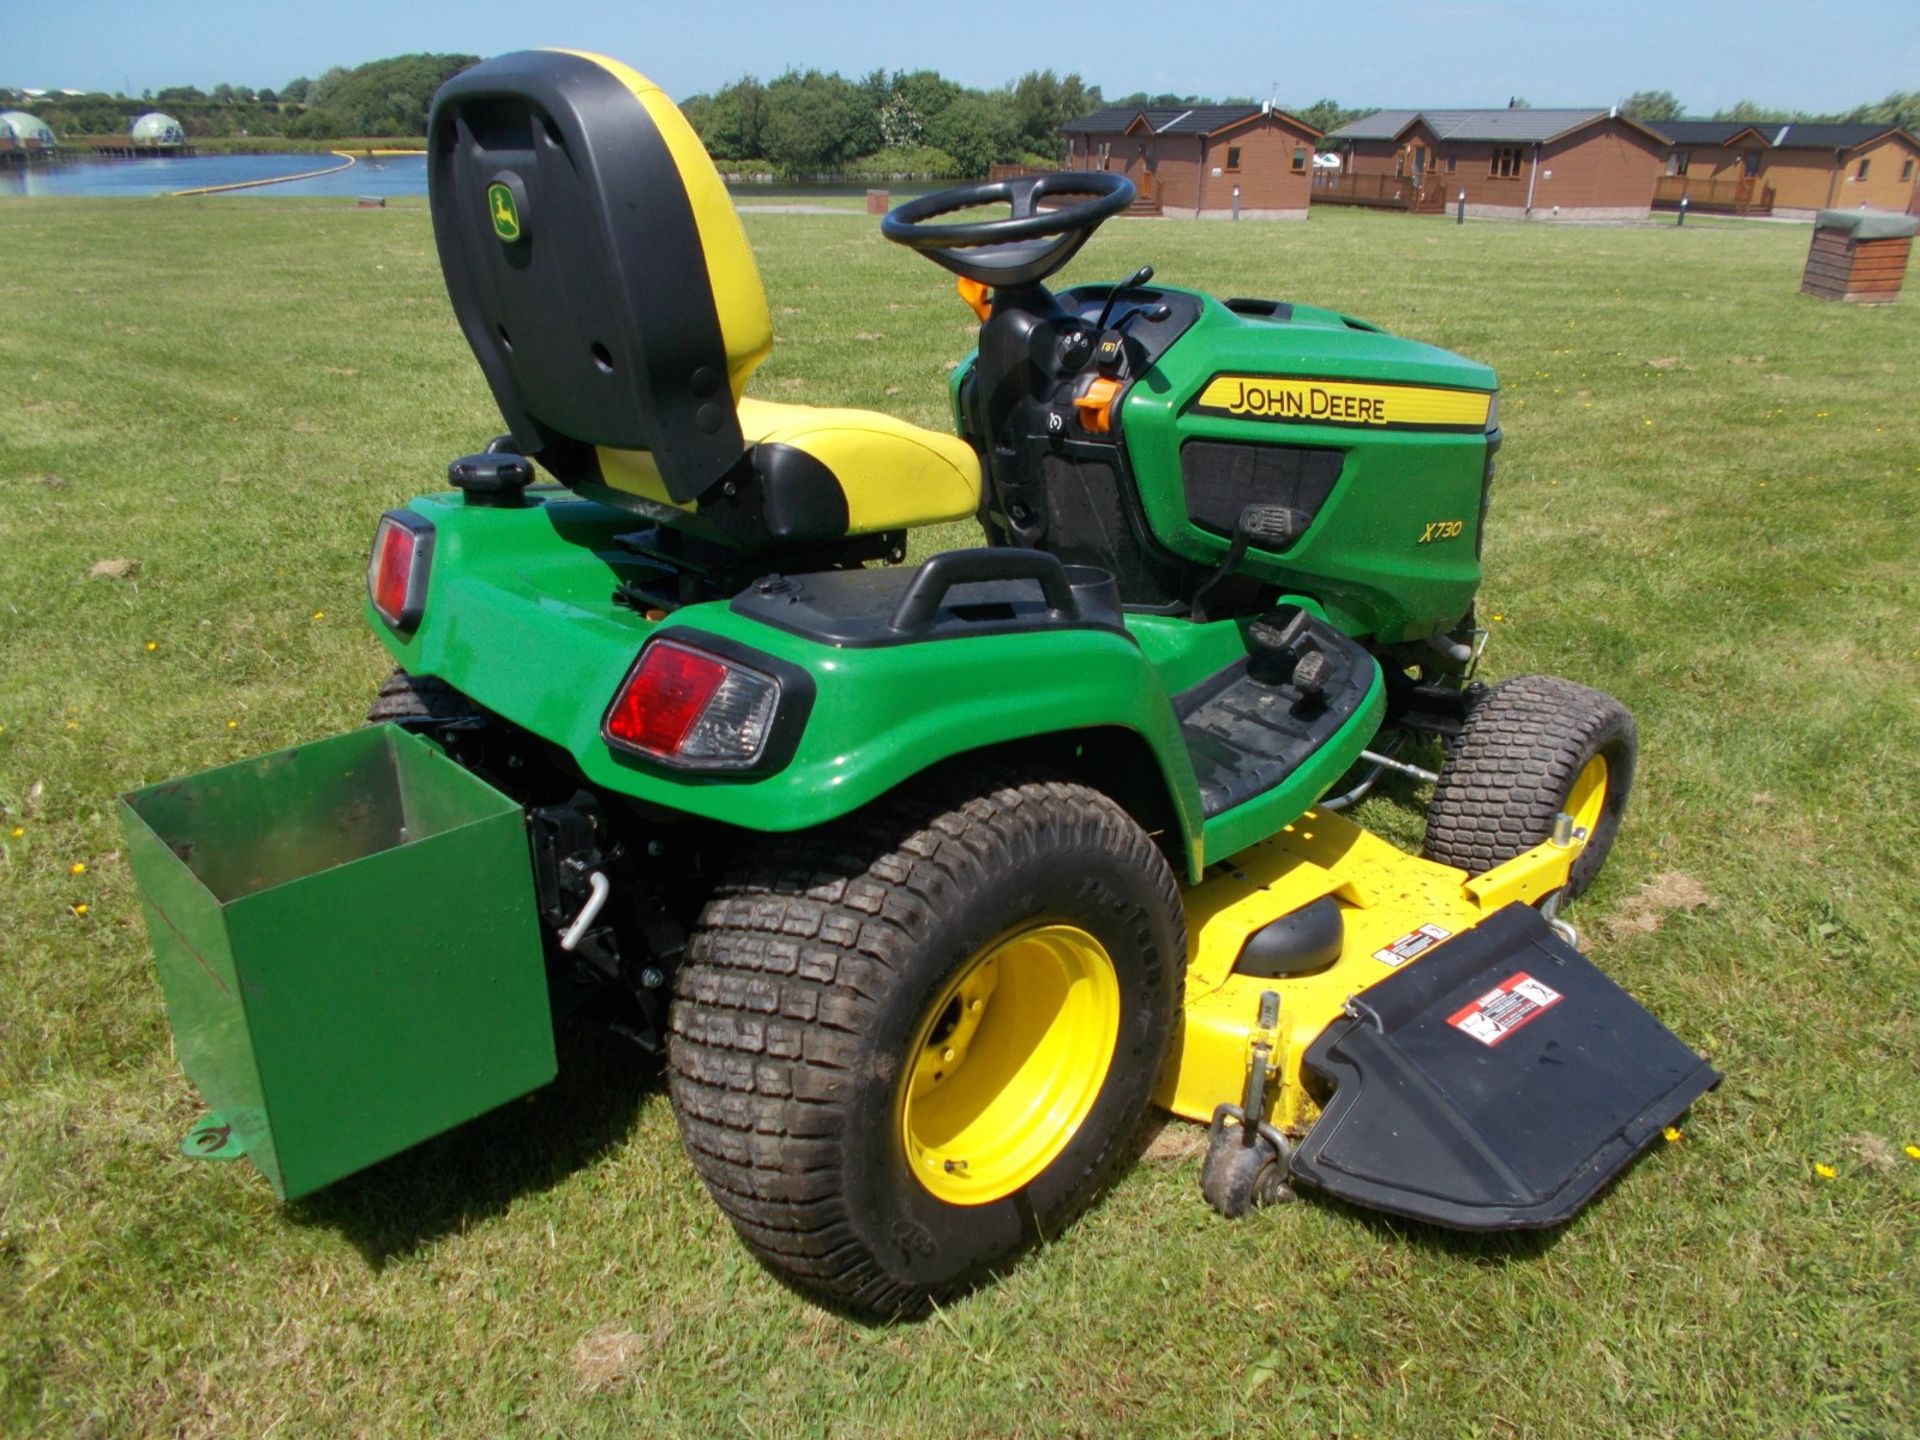 2018 JOHN DEERE X730 RIDE ON LAWN TRACTOR, 194 HOURS, 60” CUTTING DECK *PLUS VAT* - Image 5 of 20